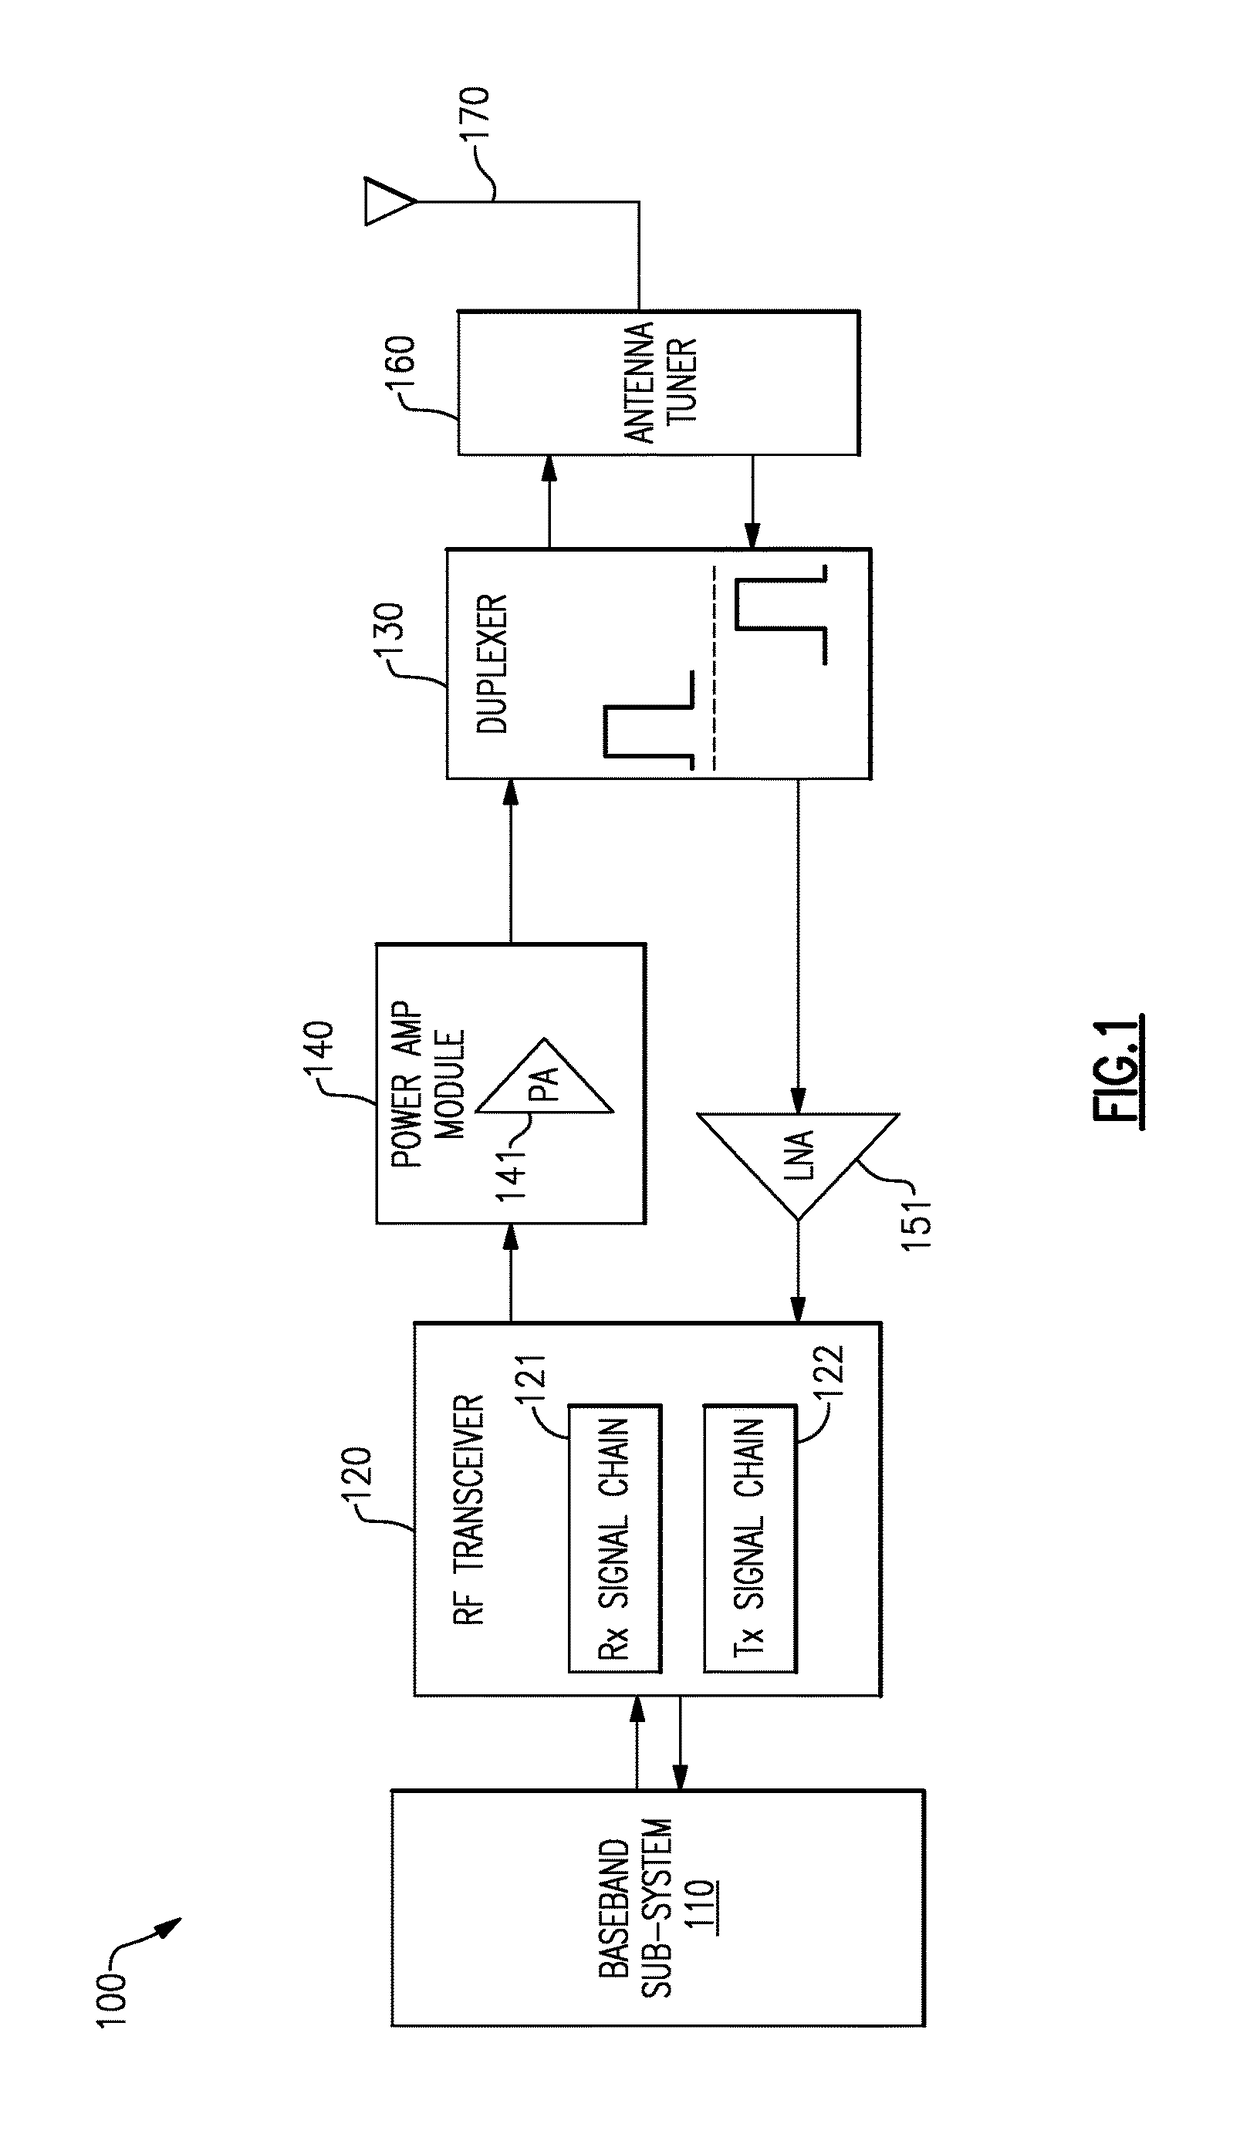 Variable load power amplifier supporting dual-mode envelope tracking and average power tracking performance